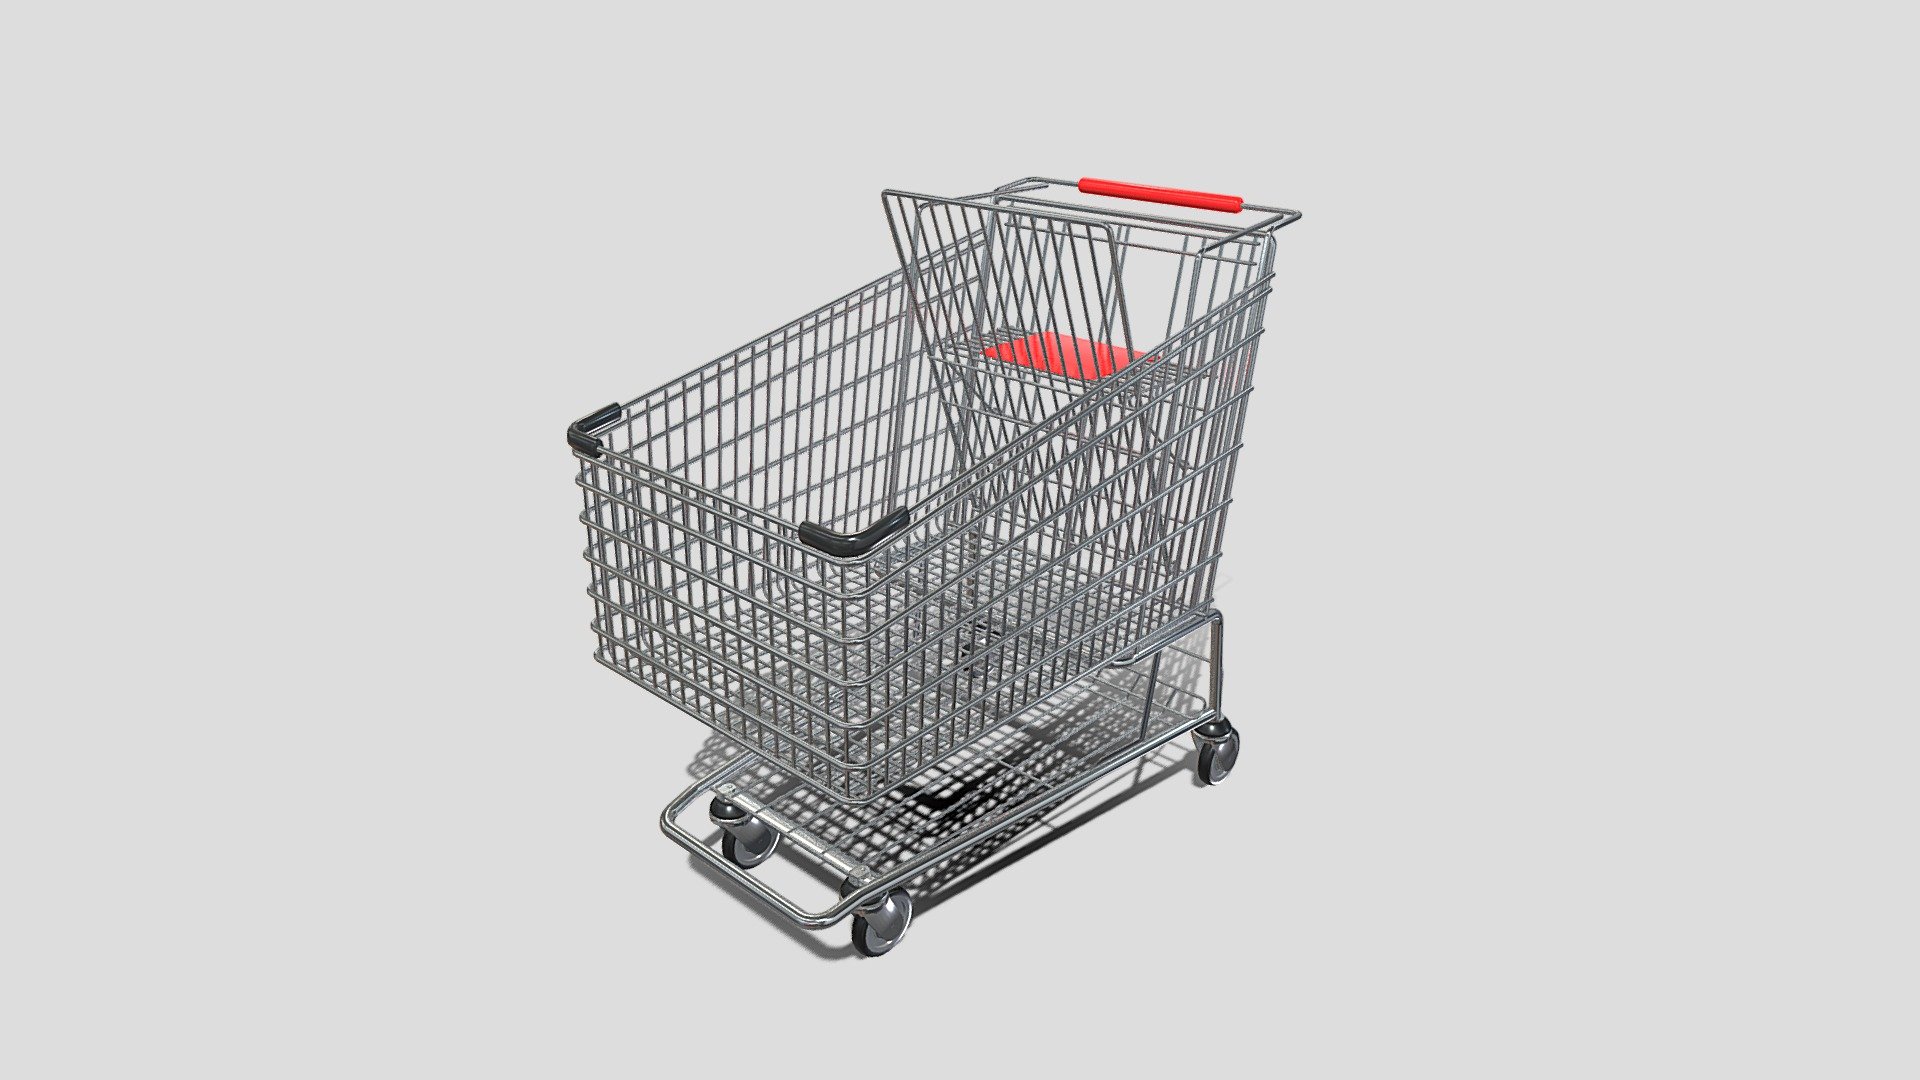 Shopping cart 3d model rendered with Cycles in Blender, as per seen on attached images. 
The model is scaled to real-life scale.

File formats:
-.blend, rendered with cycles, as seen in the images;
-.obj, with materials applied;
-.dae, with materials applied;
-.fbx, with materials applied;
-.stl;

3D Software:
The 3D model was originally created in Blender 3.1 and rendered with Cycles.

Materials and textures:
The models have materials applied in all formats, and are ready to import and render.
Materials are image based using PBR, the model comes with five 4k png image textures.

Preview scenes:
The preview images are rendered in Blender using its built-in render engine &lsquo;Cycles'.
Note that the blend files come directly with the rendering scene included and the render command will generate the exact result as seen in previews.
Scene elements are on a different layer from the actual model for easier manipulation of objects.

For any problems please feel free to contact me.

Don't forget to rate and enjoy! - Shopping cart v8 - Buy Royalty Free 3D model by dragosburian 3d model